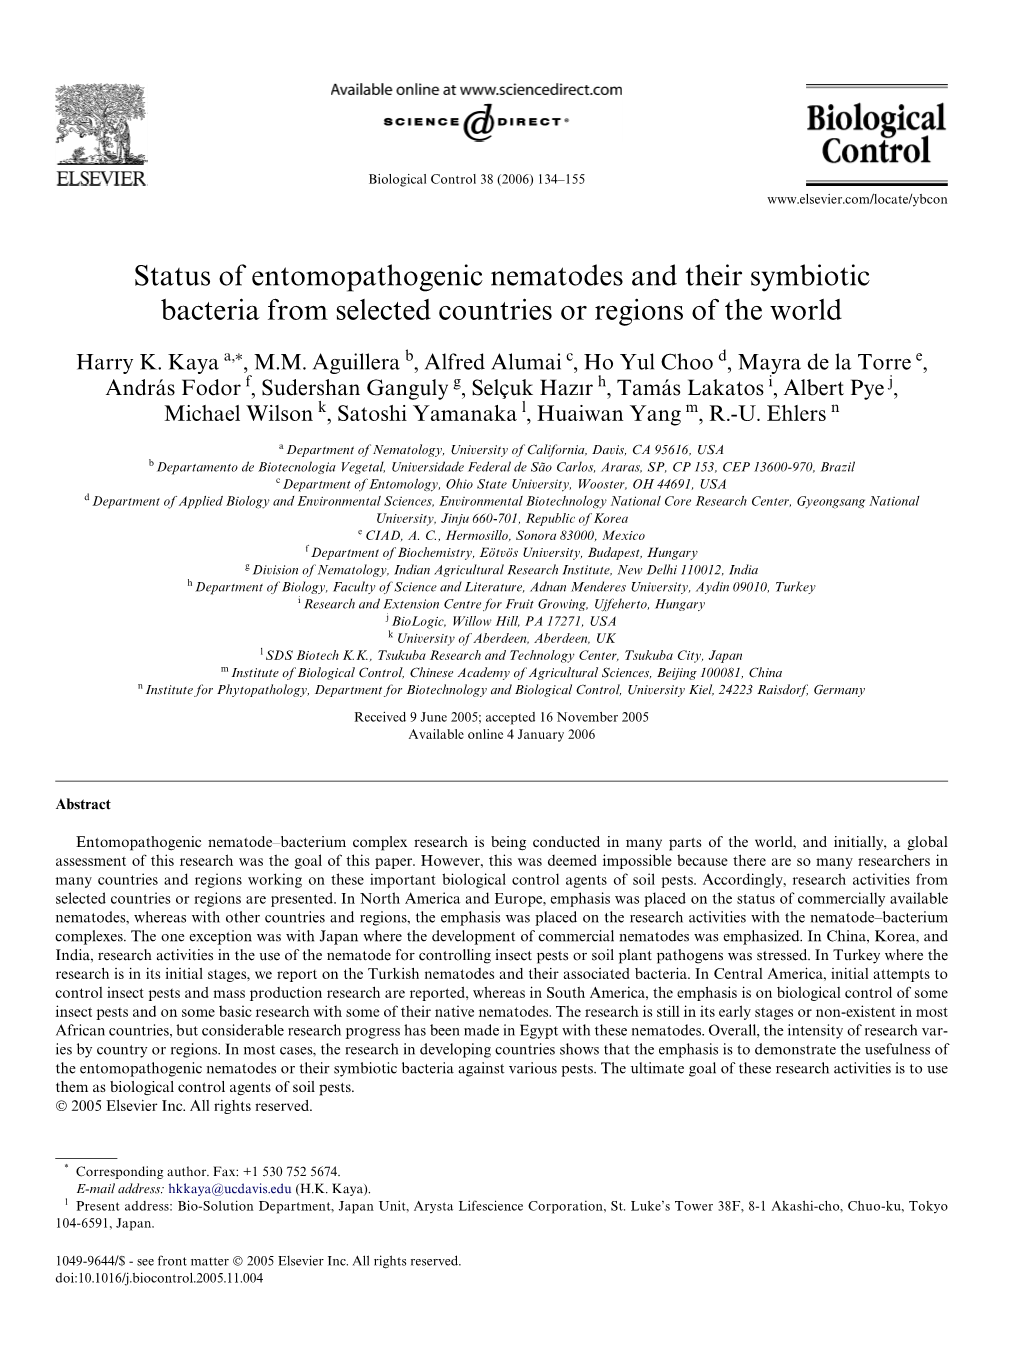 Status of Entomopathogenic Nematodes and Their Symbiotic Bacteria from Selected Countries Or Regions of the World